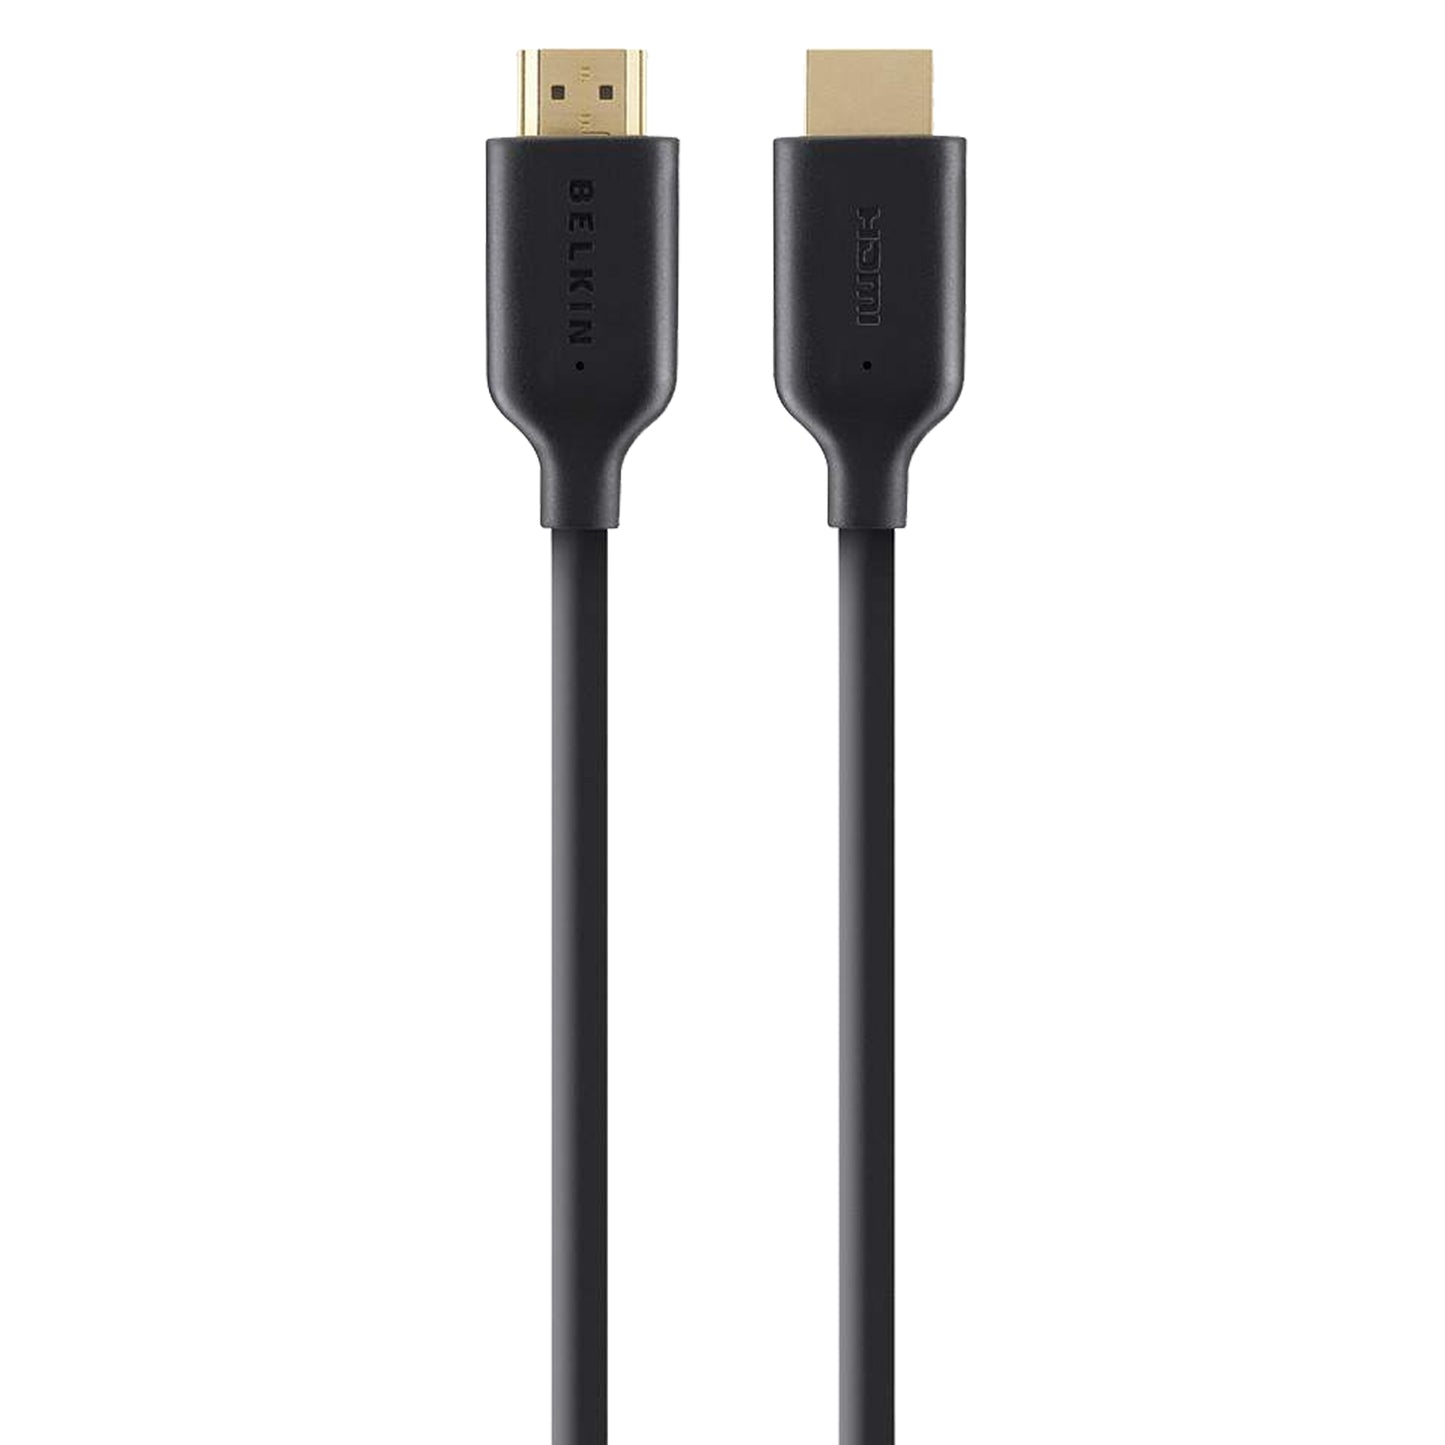 BELKIN High Speed HDMI Cable with Ethernet and 4K Supported ( 1 Meter ) - HDMI-to-HDMI - Black (Barcode: 745883713059 )